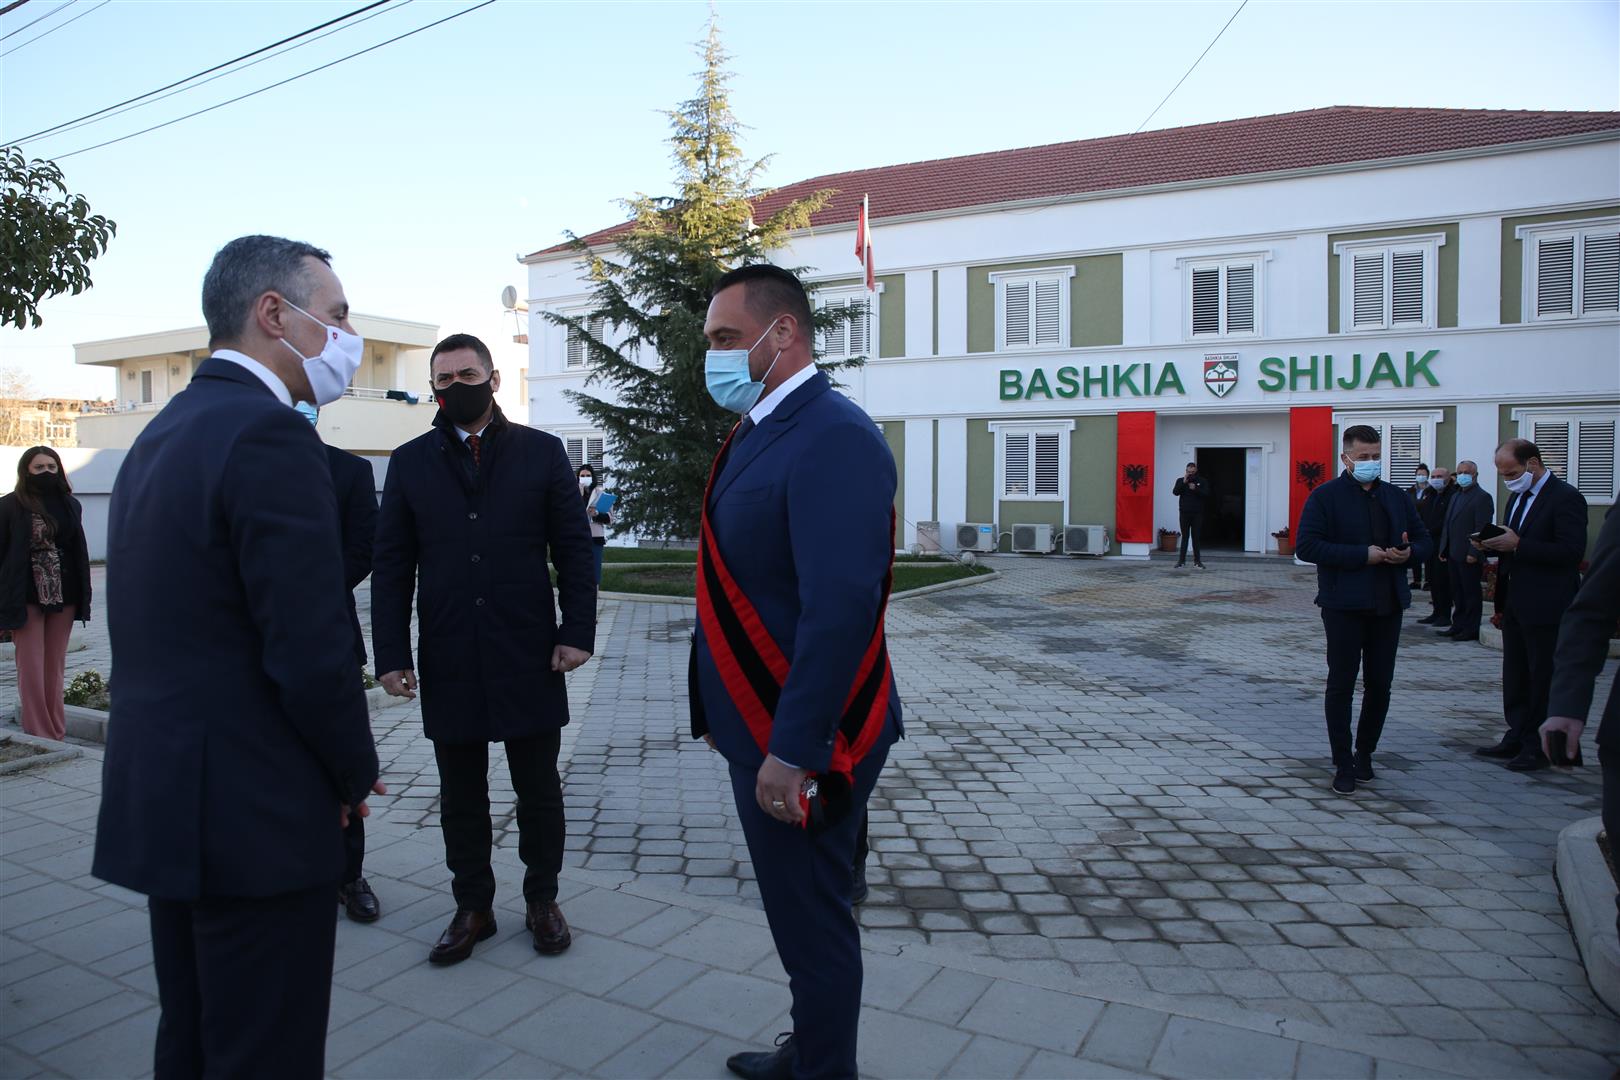 Federal Councilor Ignazio Cassis met with Albania's President Ilir Meta, Prime Minister Edi Rama and Acting Minister for Europe and Foreign Affairs Gent Cakaj. He met also the Minister for Reconstruction Arben Ahmetaj and visiteted houses renovated in Shijak with Swiss support. 